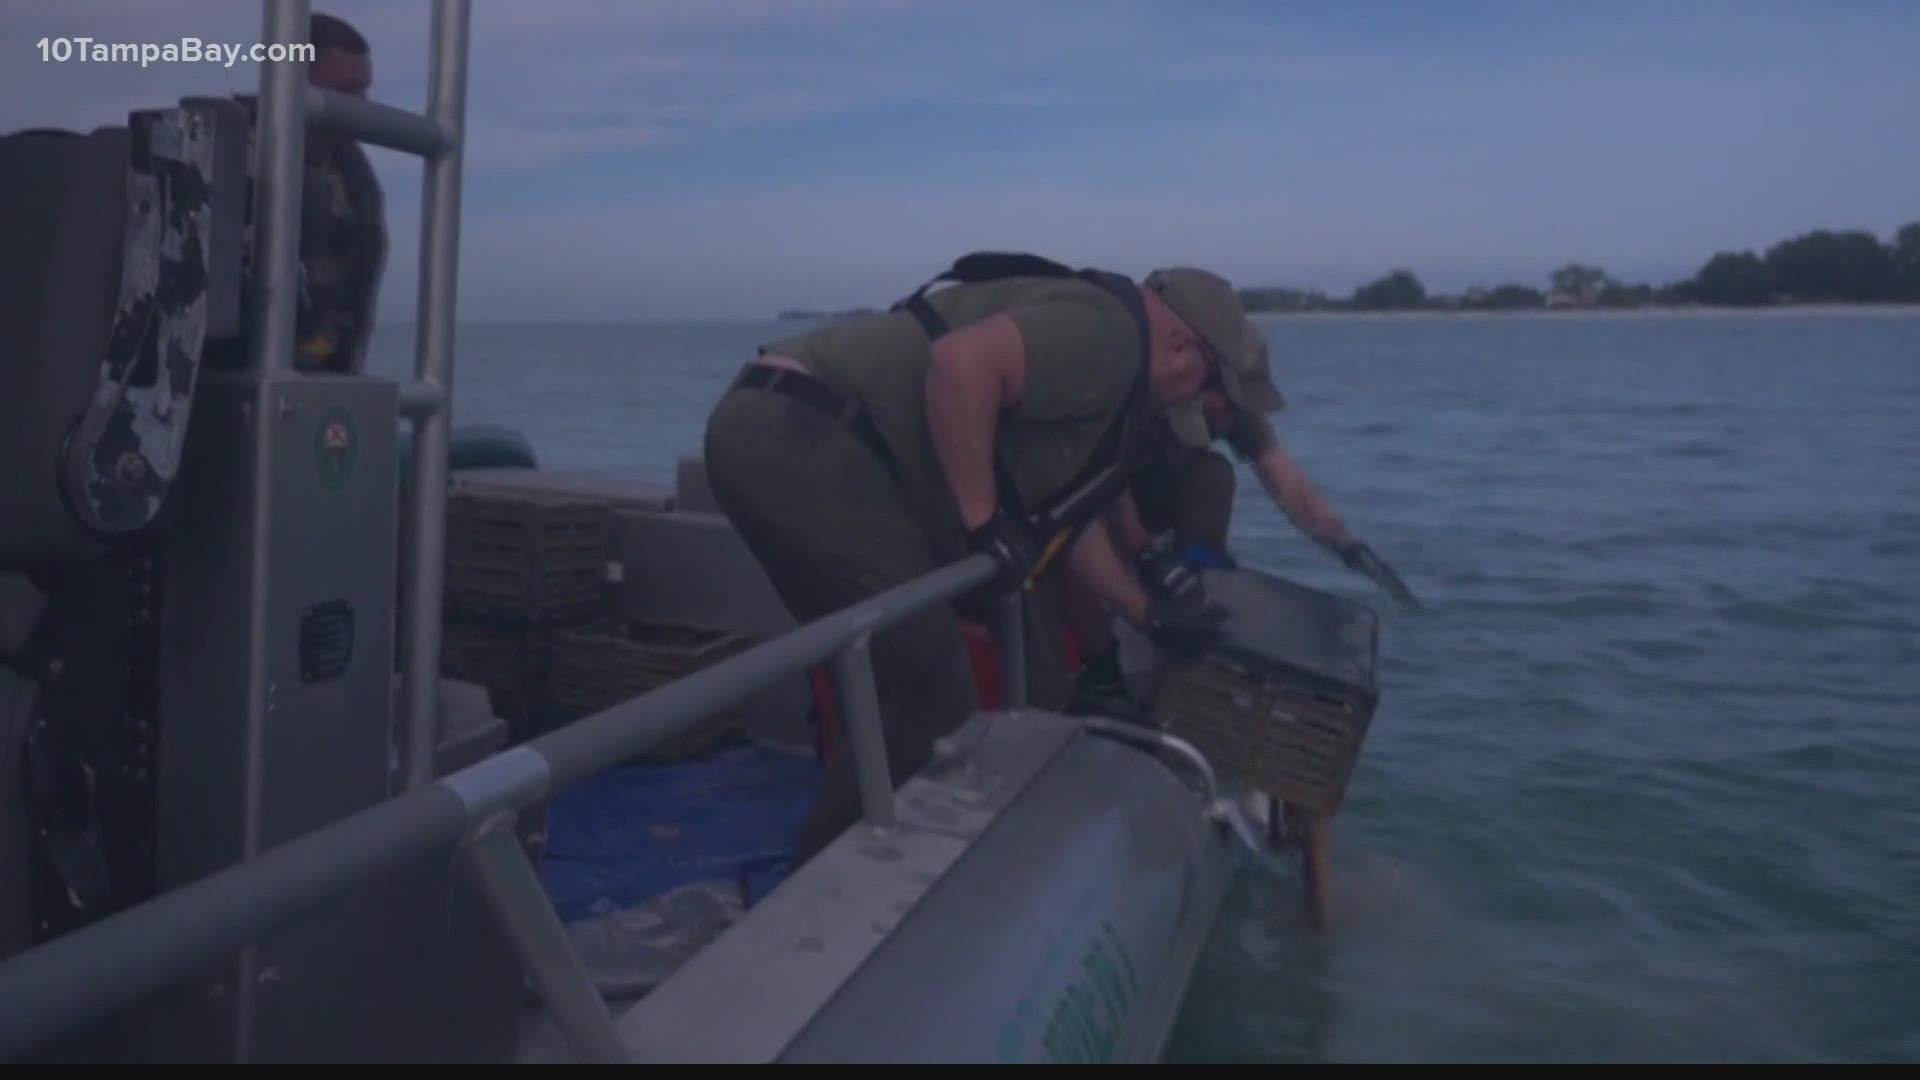 Former Buccaneers were among those diving to retrieve marine debris and discarded fishing gear from the waters.